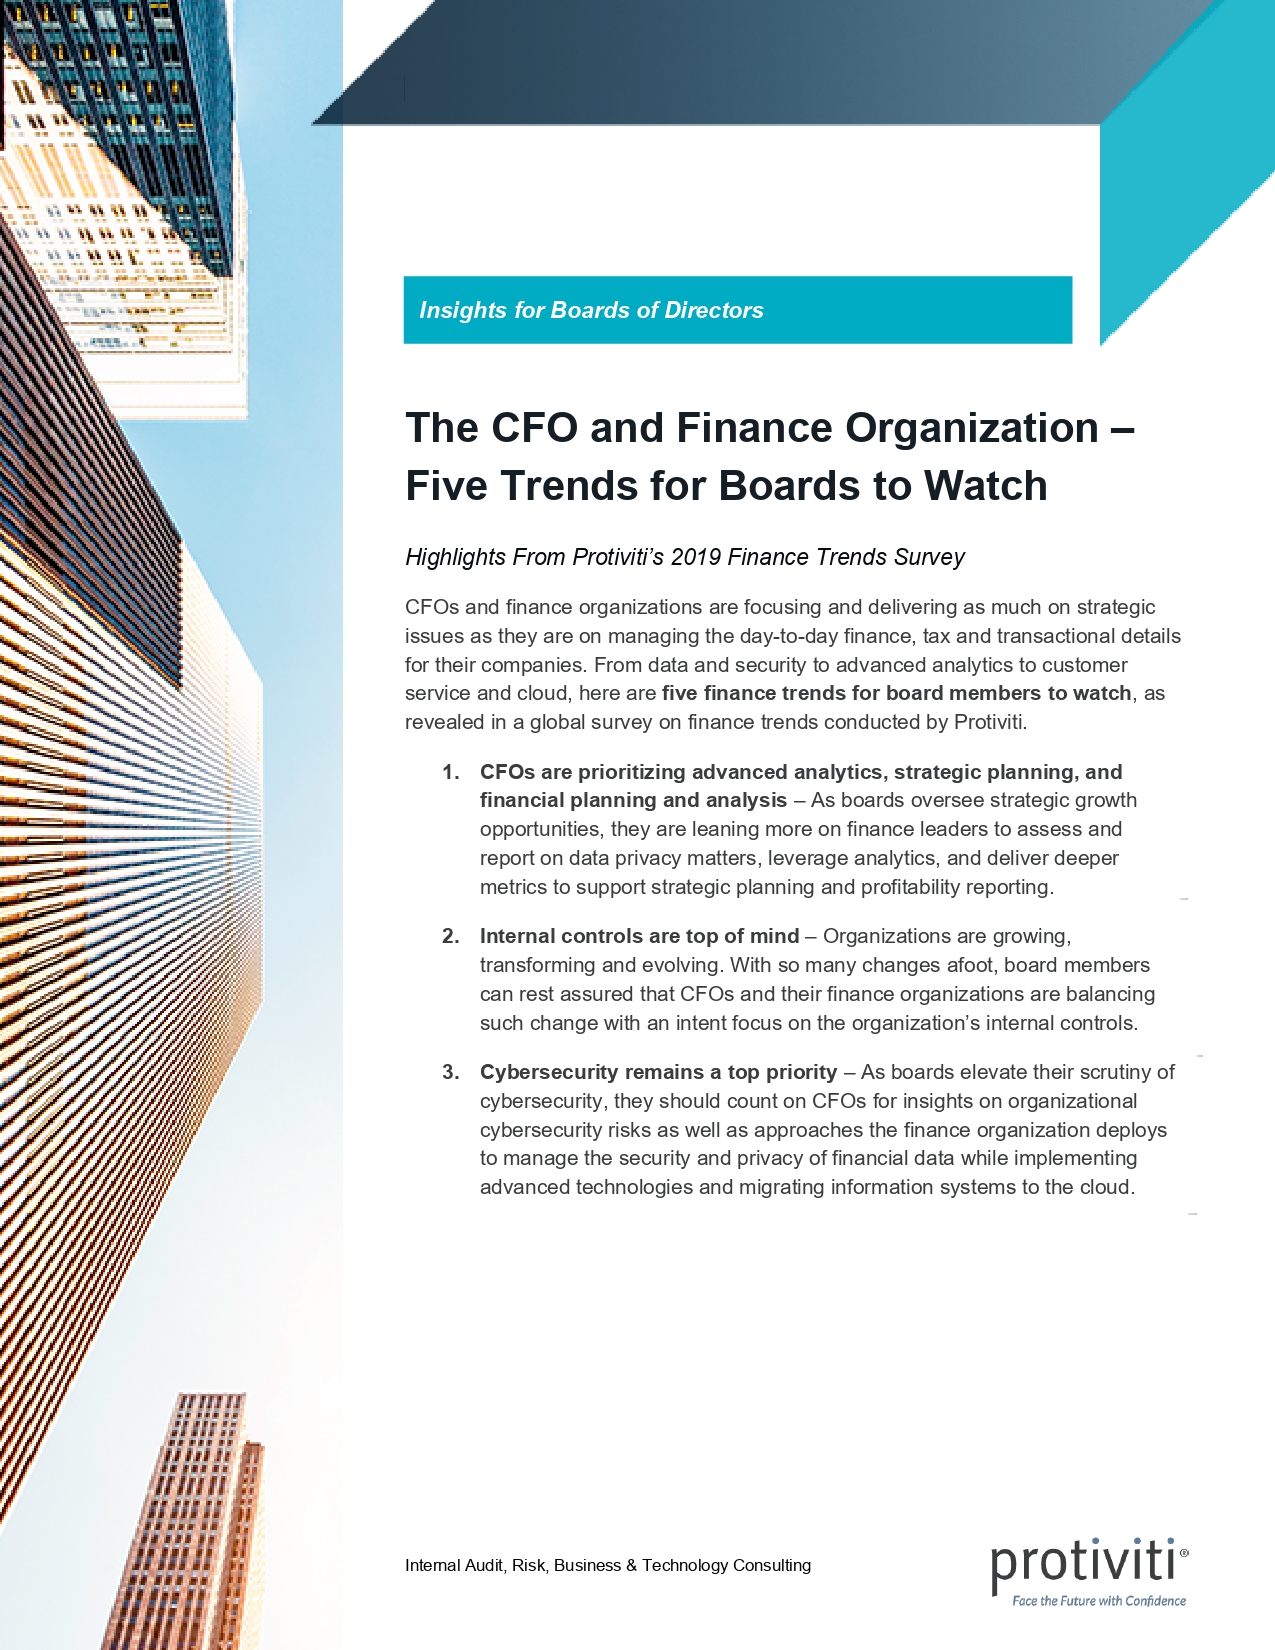 Screenshot of the first page of The CFO and Finance Organization Five Trends for Boards to Watch